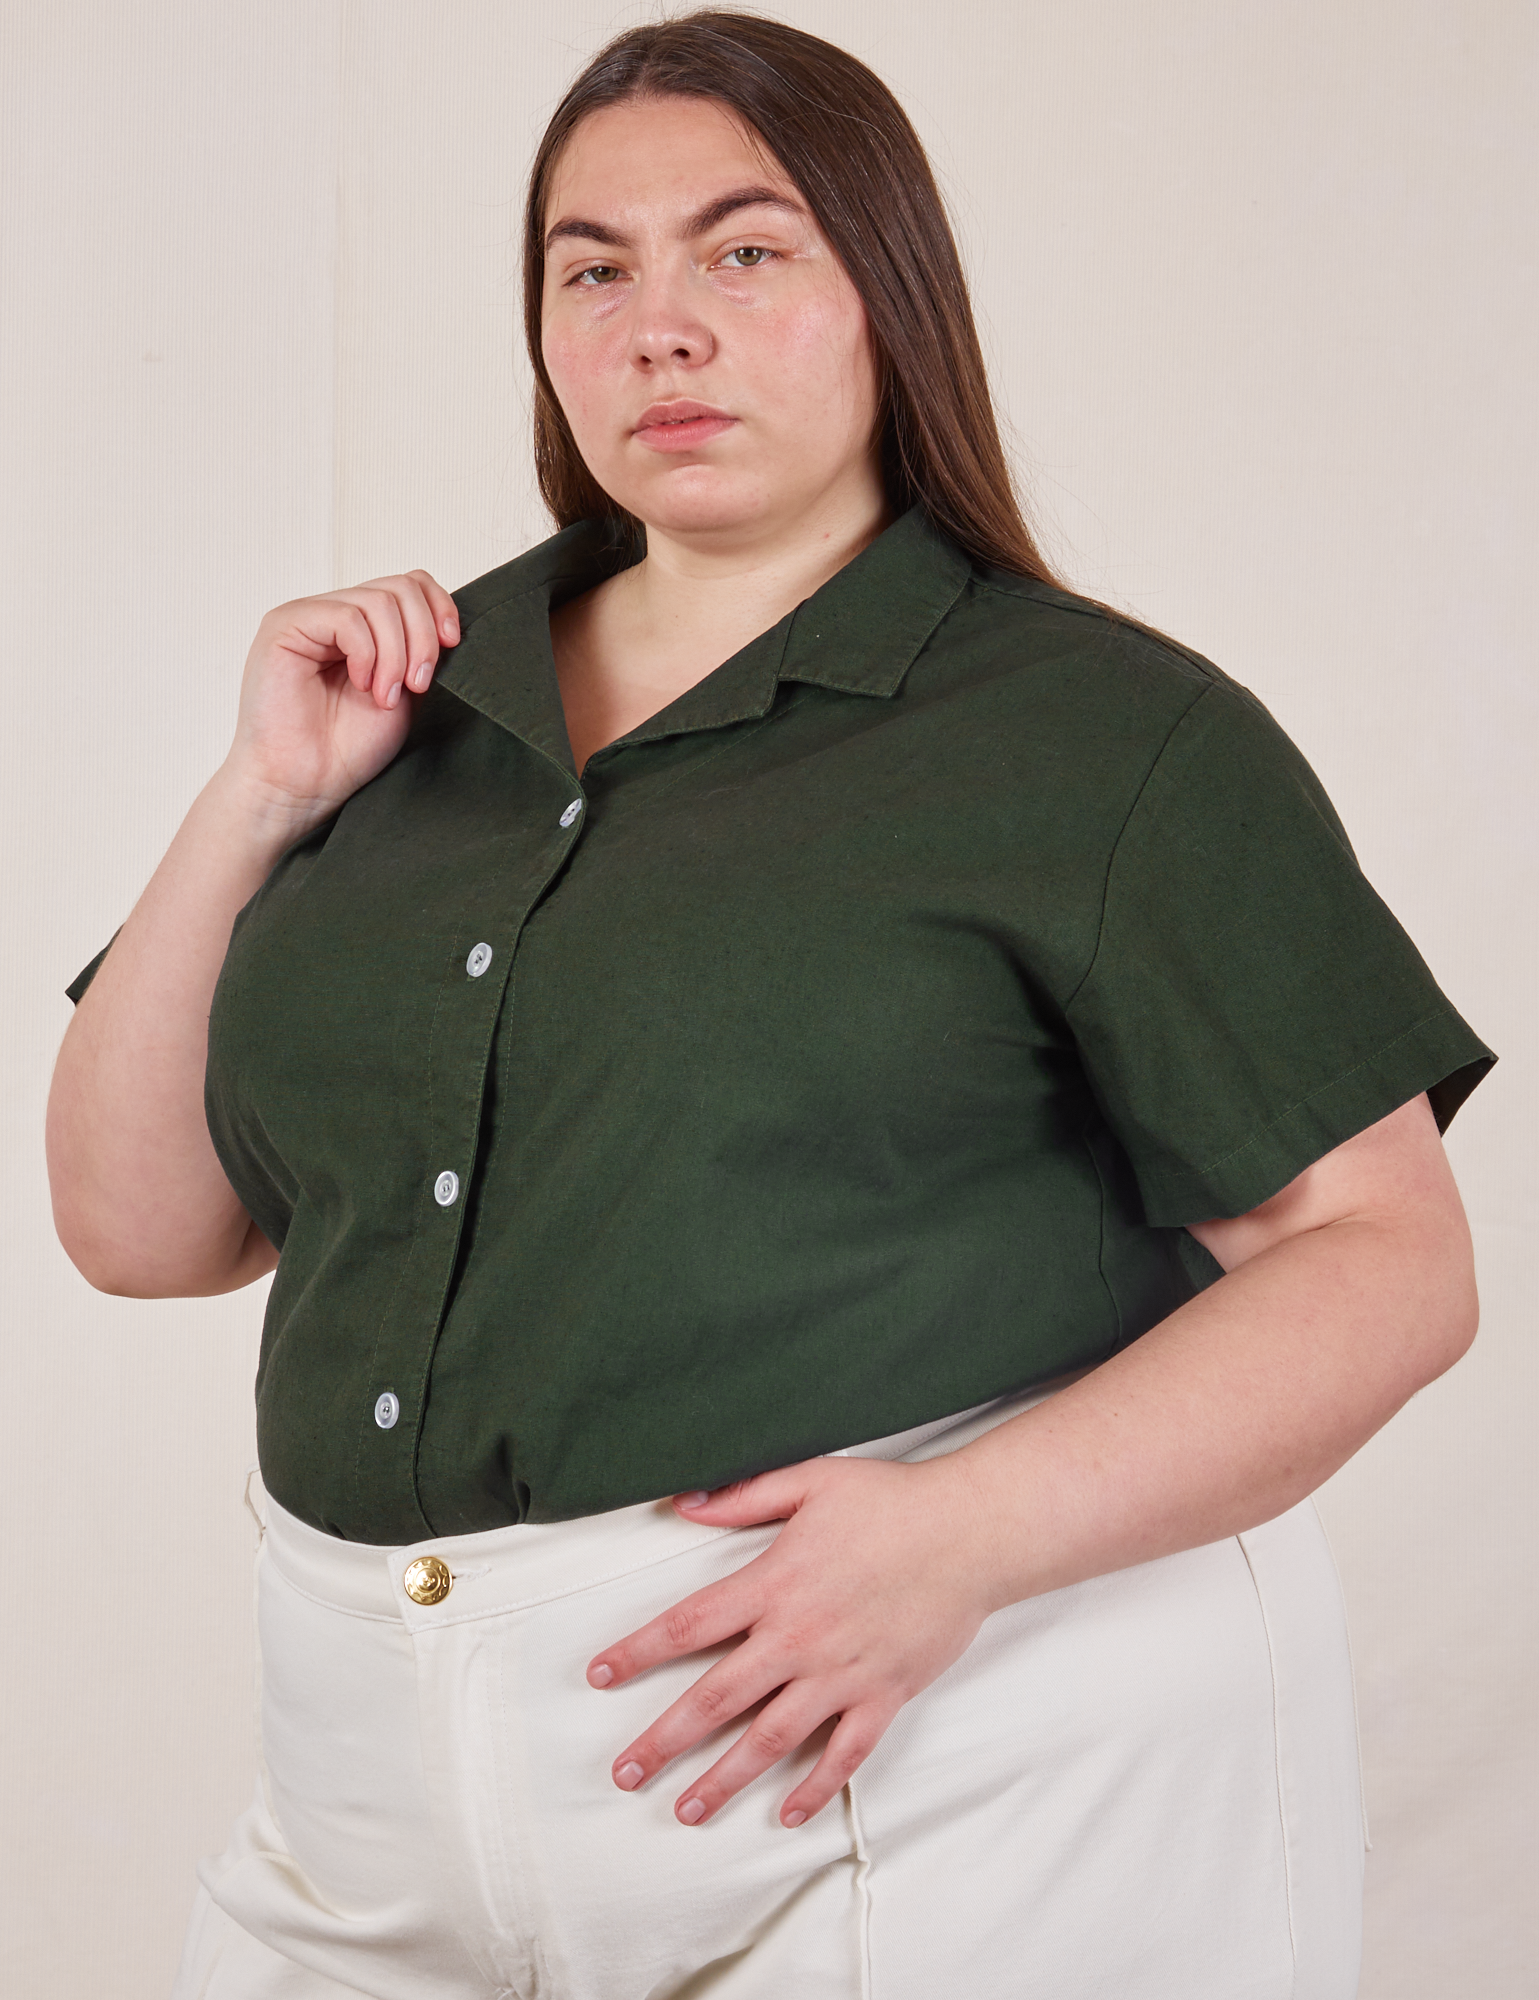 Pantry Button-Up in Swamp Green angled front view on Marielena